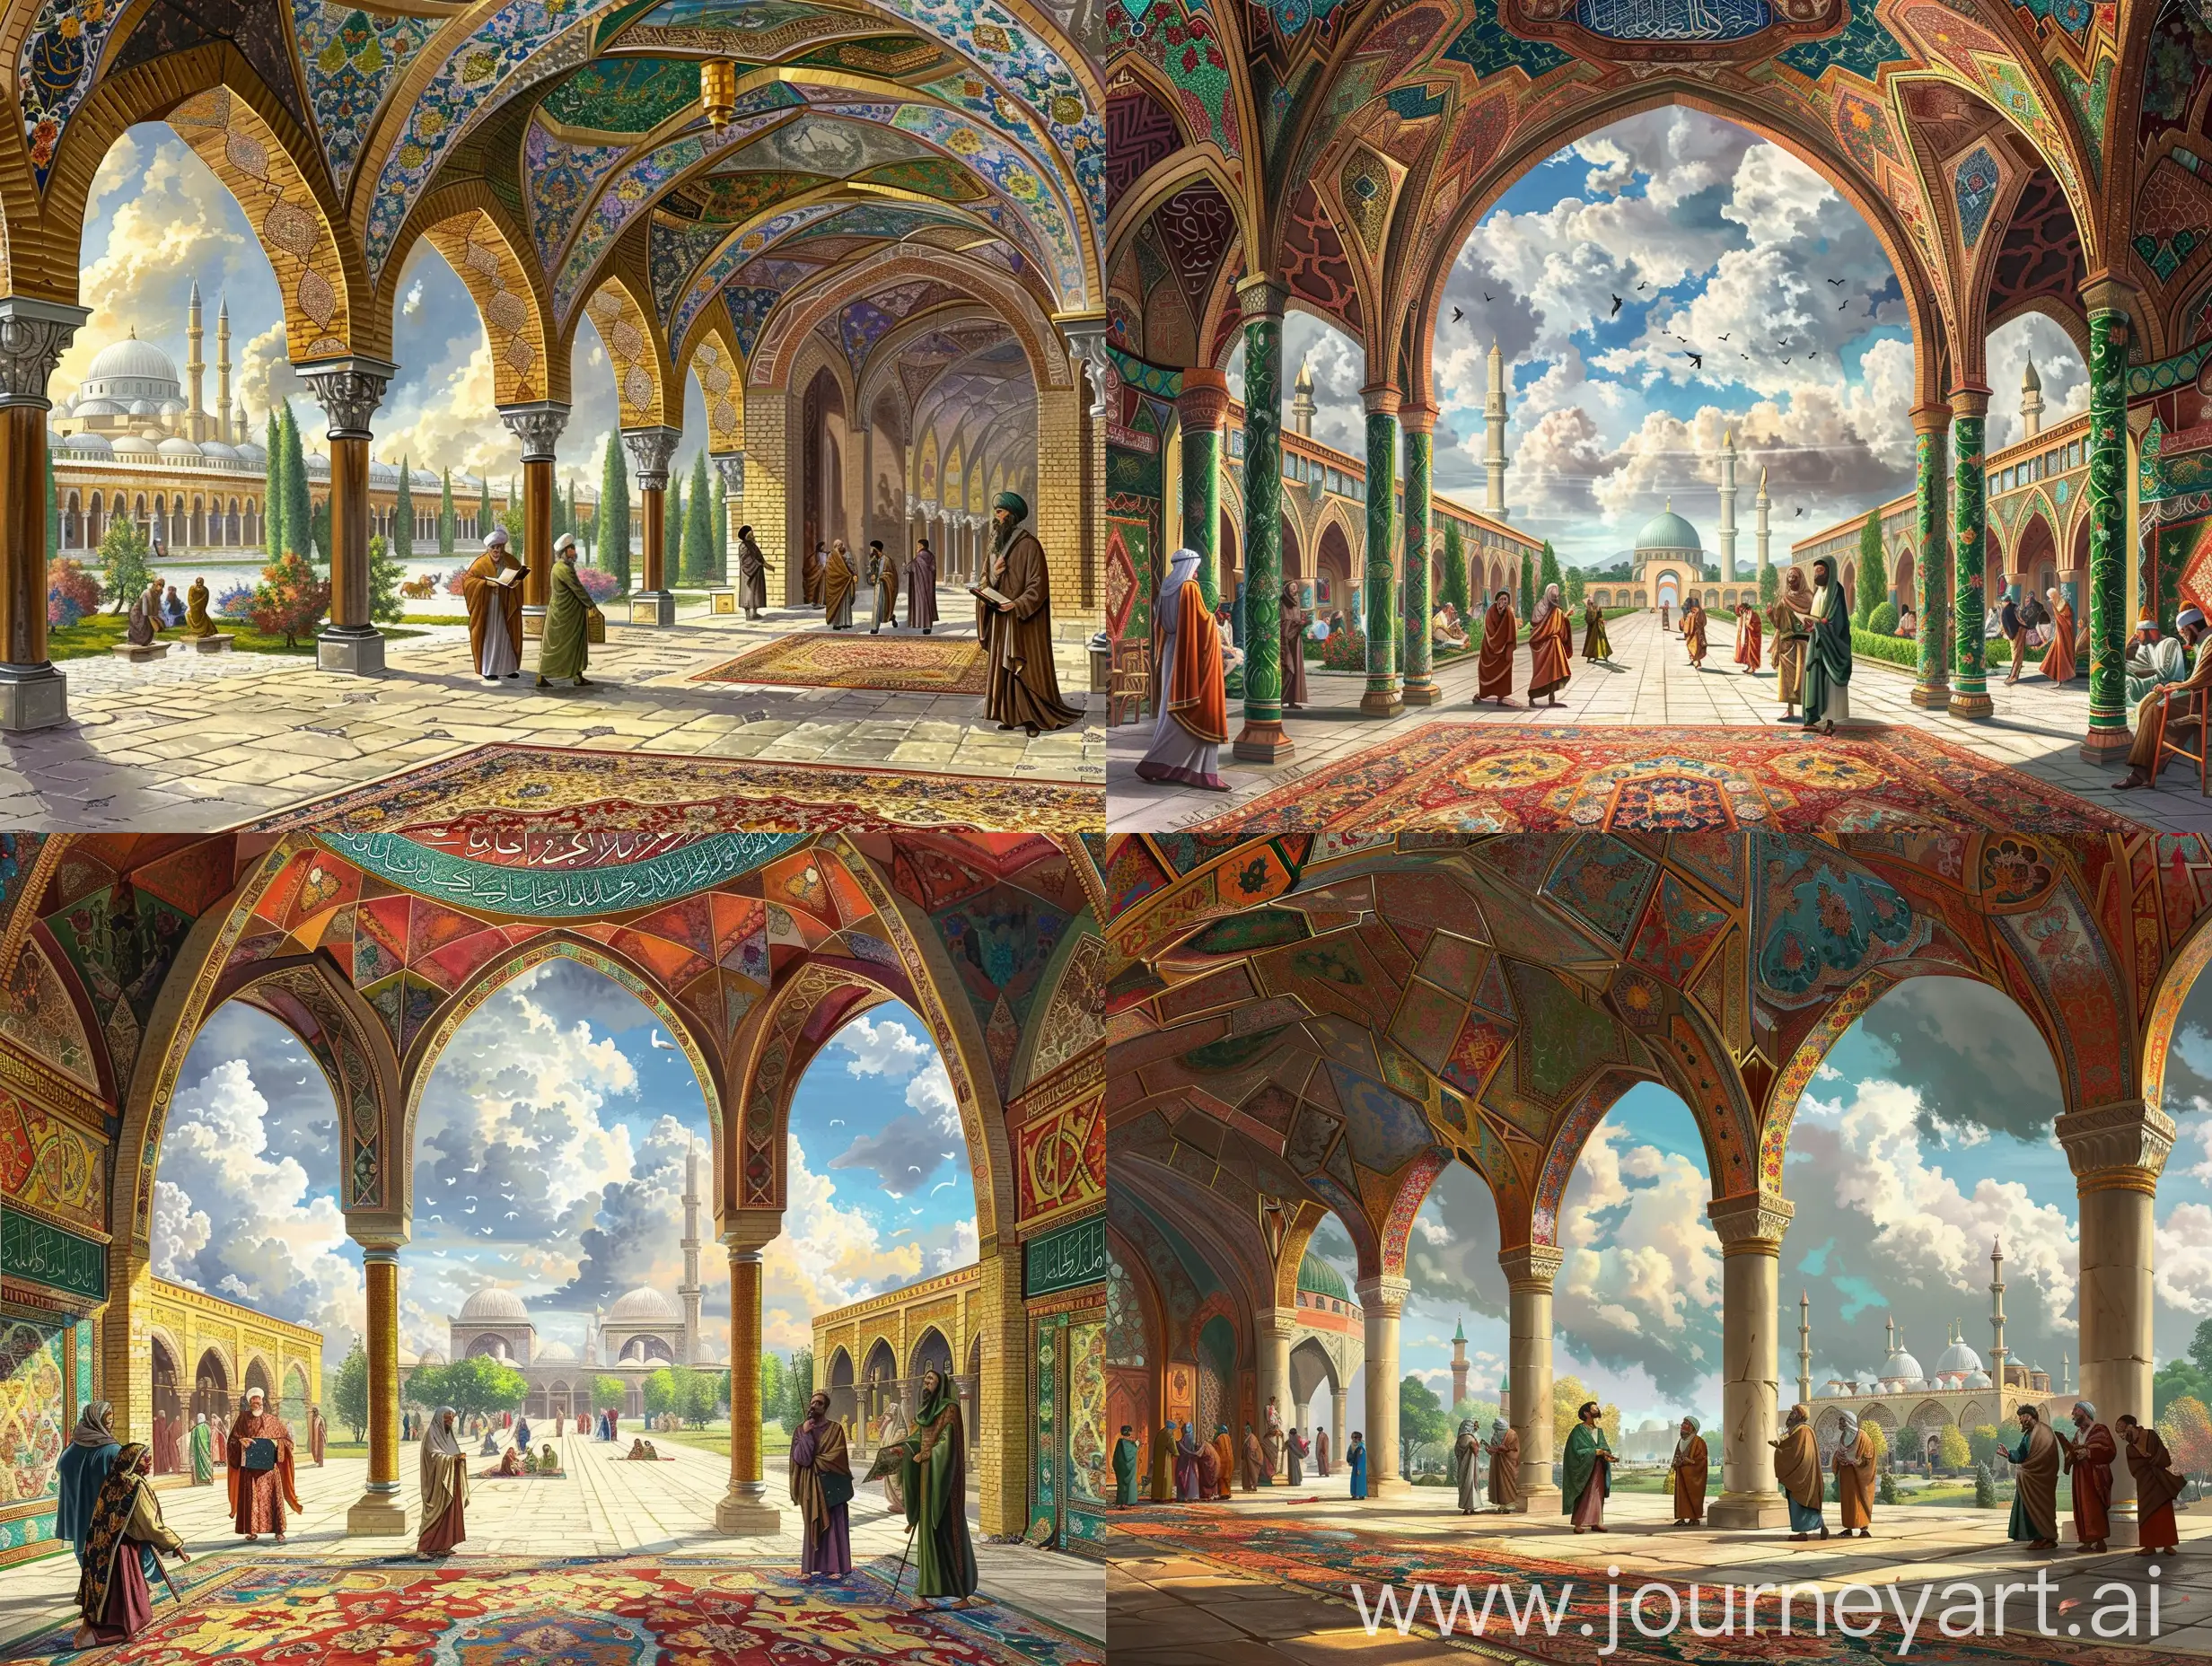 Islamic-Scholars-Debating-in-Vibrant-Medieval-Hall-with-Persian-Decor